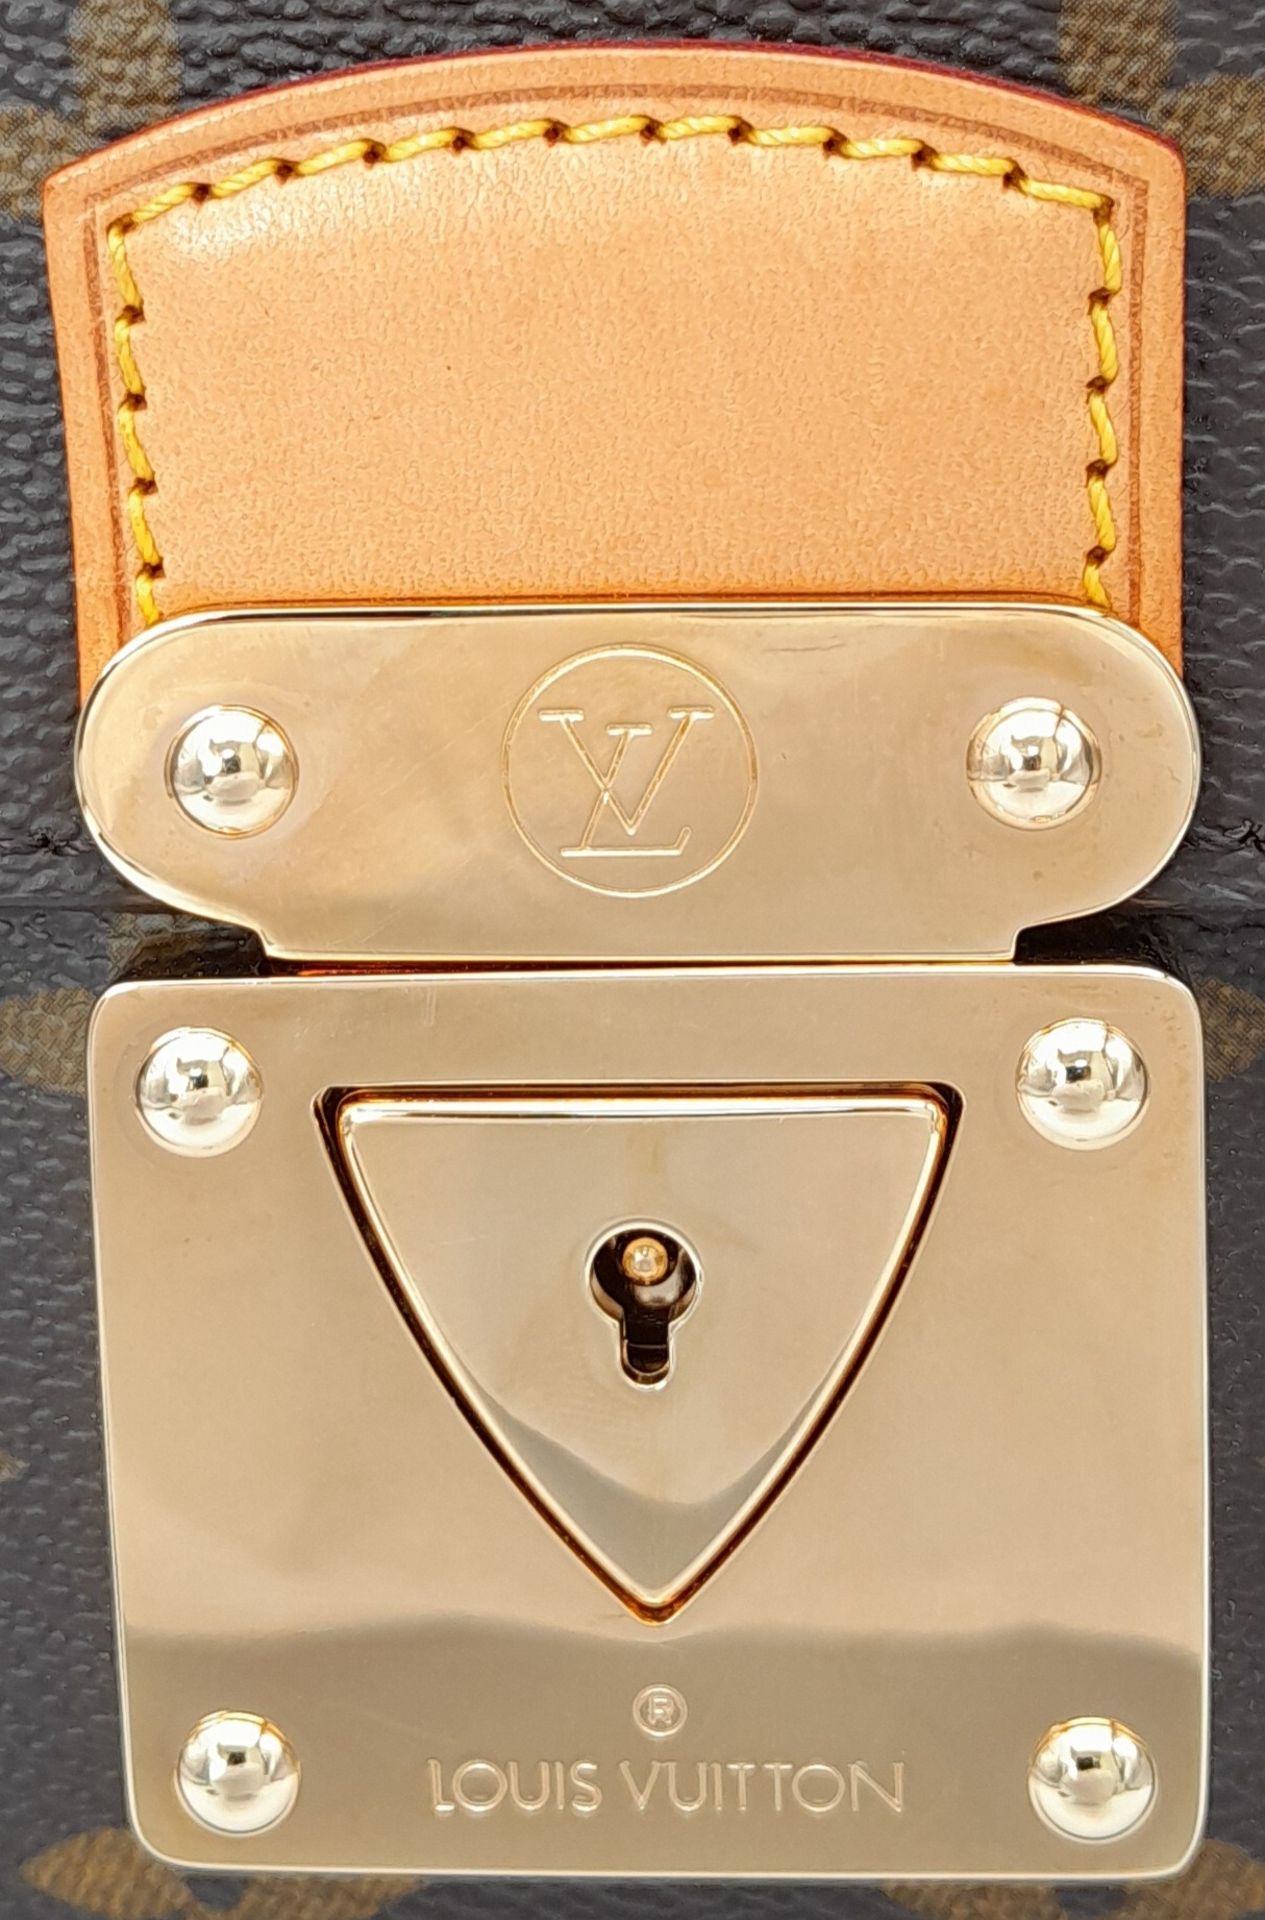 AN IMMACULATE LOUIS VUITTON CLASSIC BRIEF CASE IN UNUSED CONDITION WITH ORIGINAL DUST COVER . 38 X - Image 3 of 10